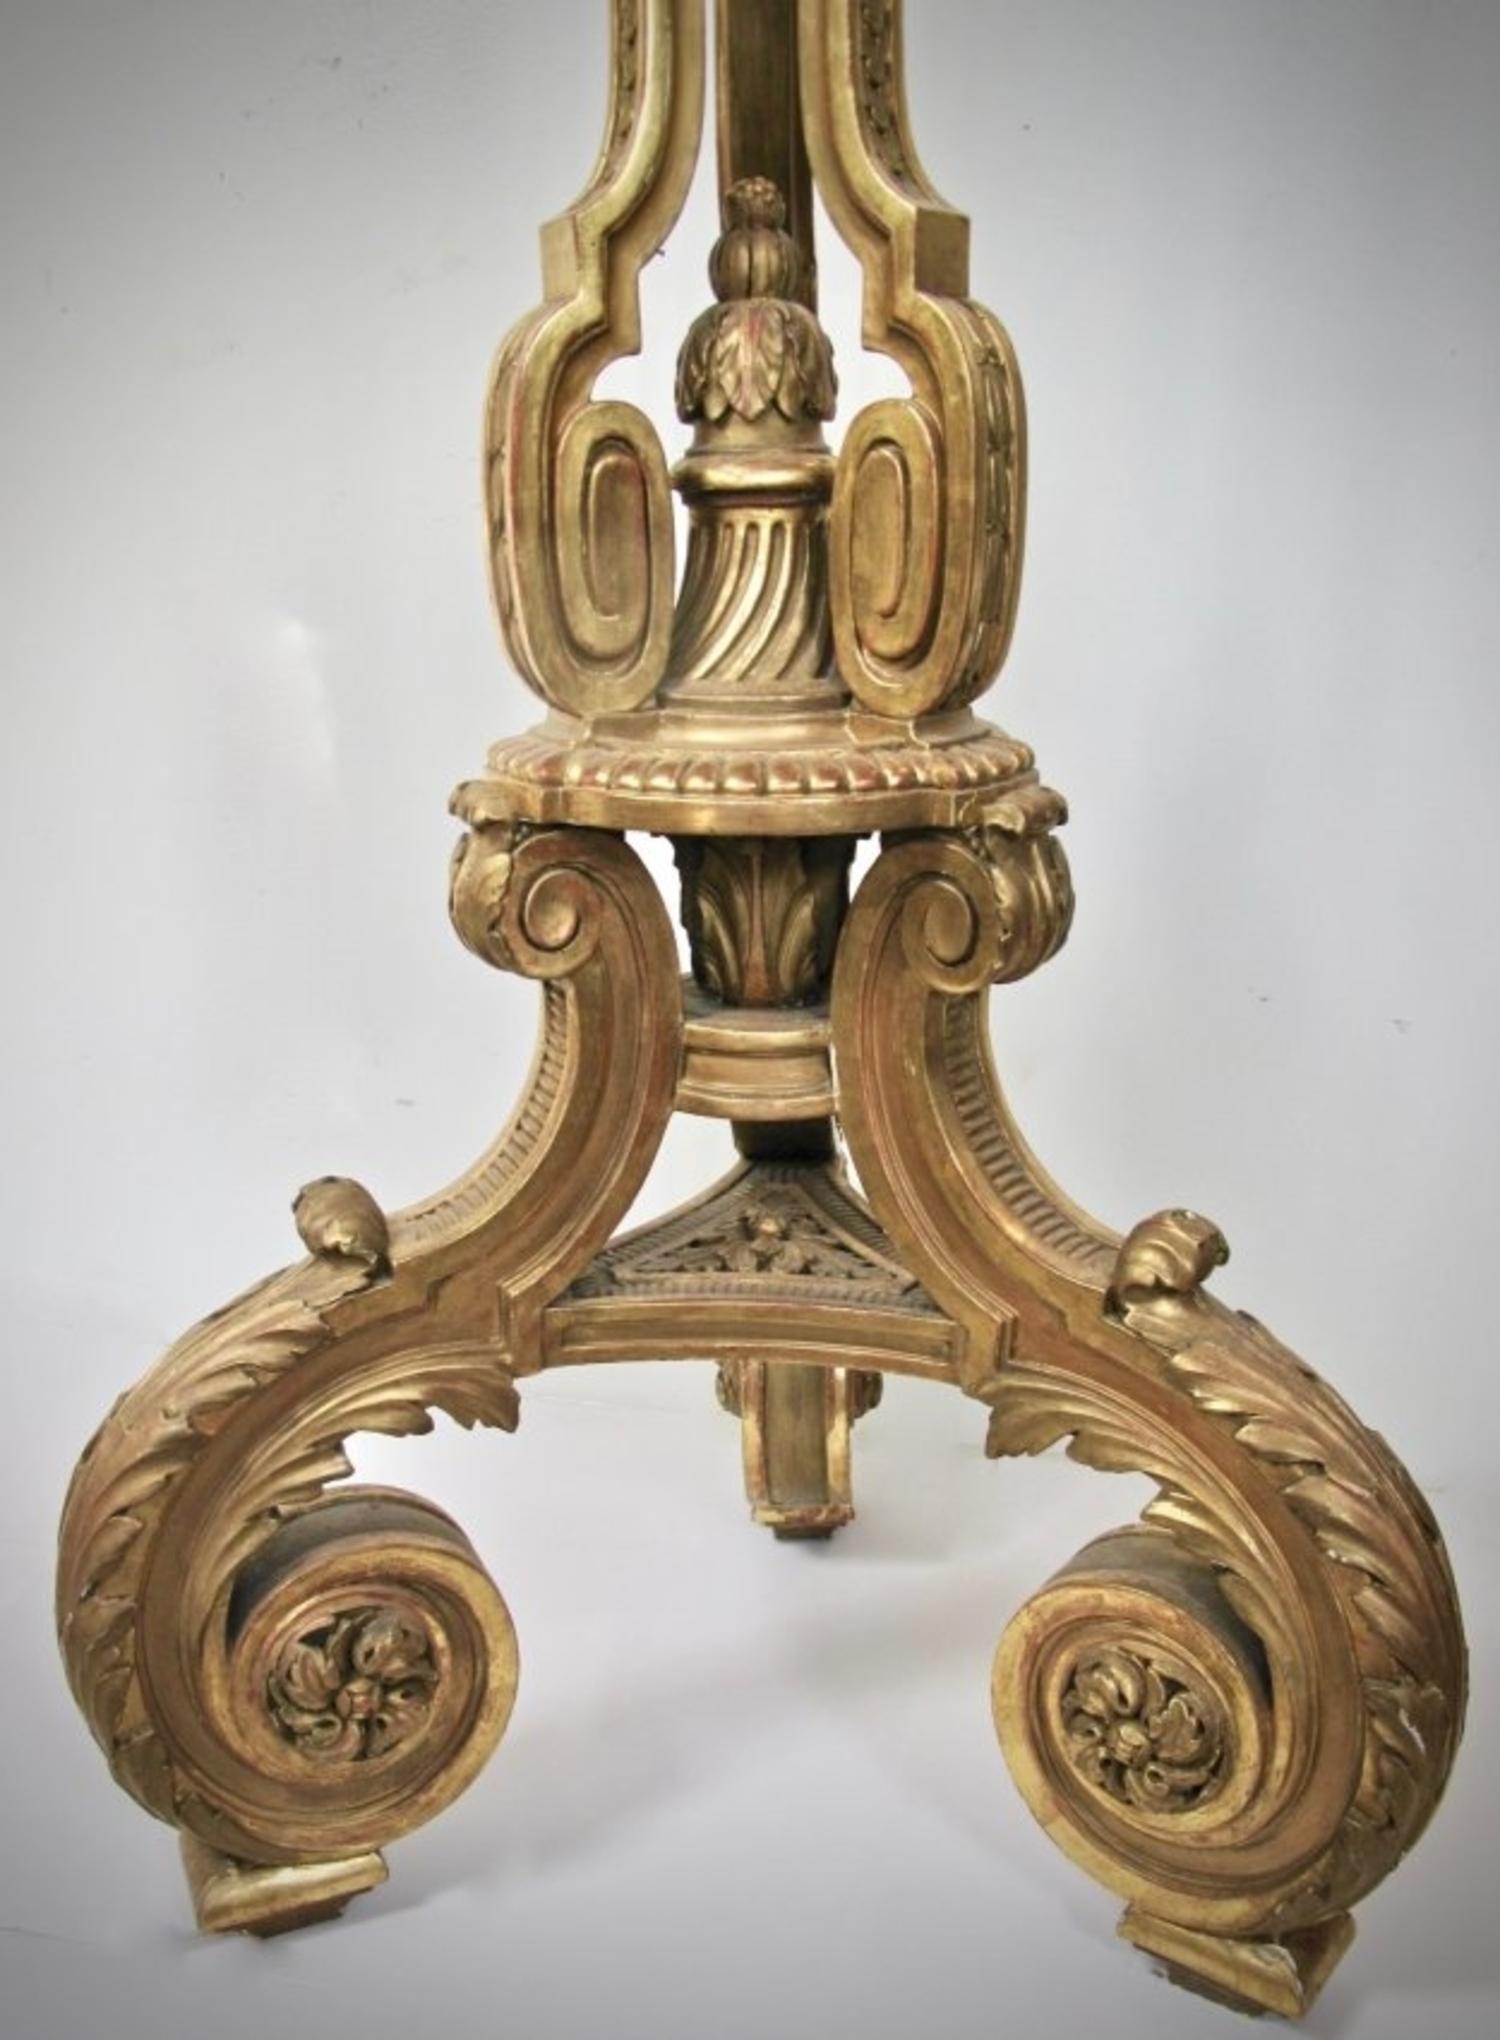 Francois Linke, Louis XIV style giltwood torchère, 1907.
Index number 1546 
Paris, 1907.
Carved giltwood.
Measures: height 5 ft. 3 1/2 in.; diameter of top 17 in.
Provenance: 
Jean Bieder, Francois Linke's foreman in the 1920s, who took over